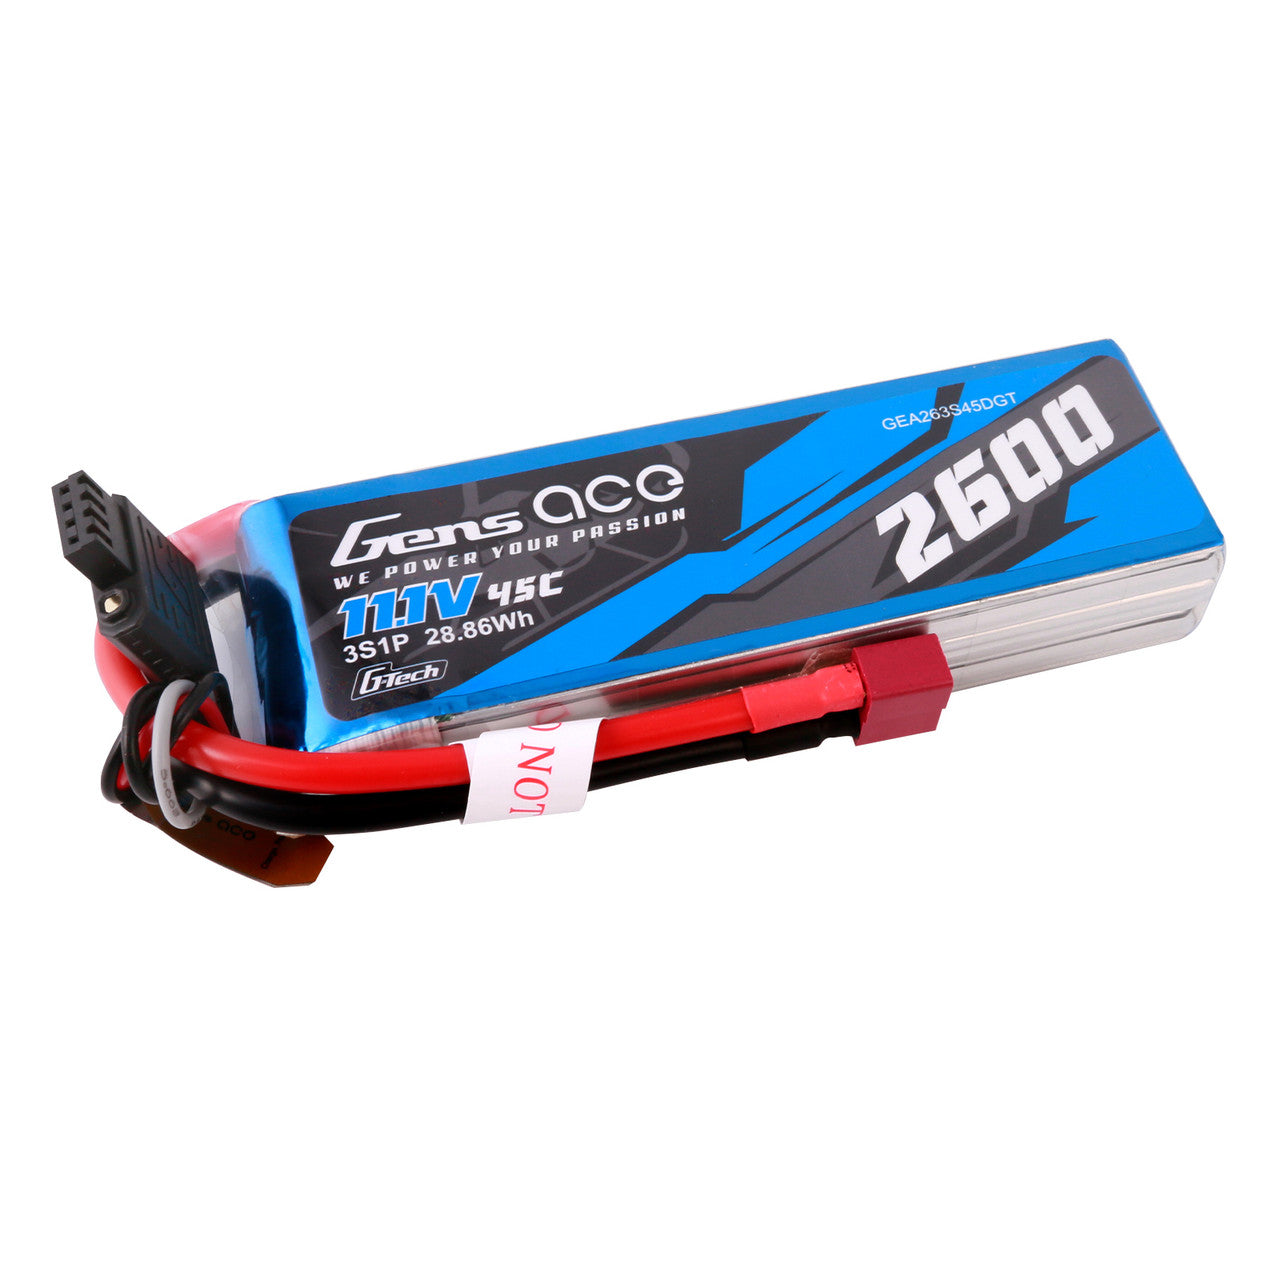 Gens Ace 2600mAh 3S 45C 11.1V G-Tech Lipo Battery Pack With Deans Plug